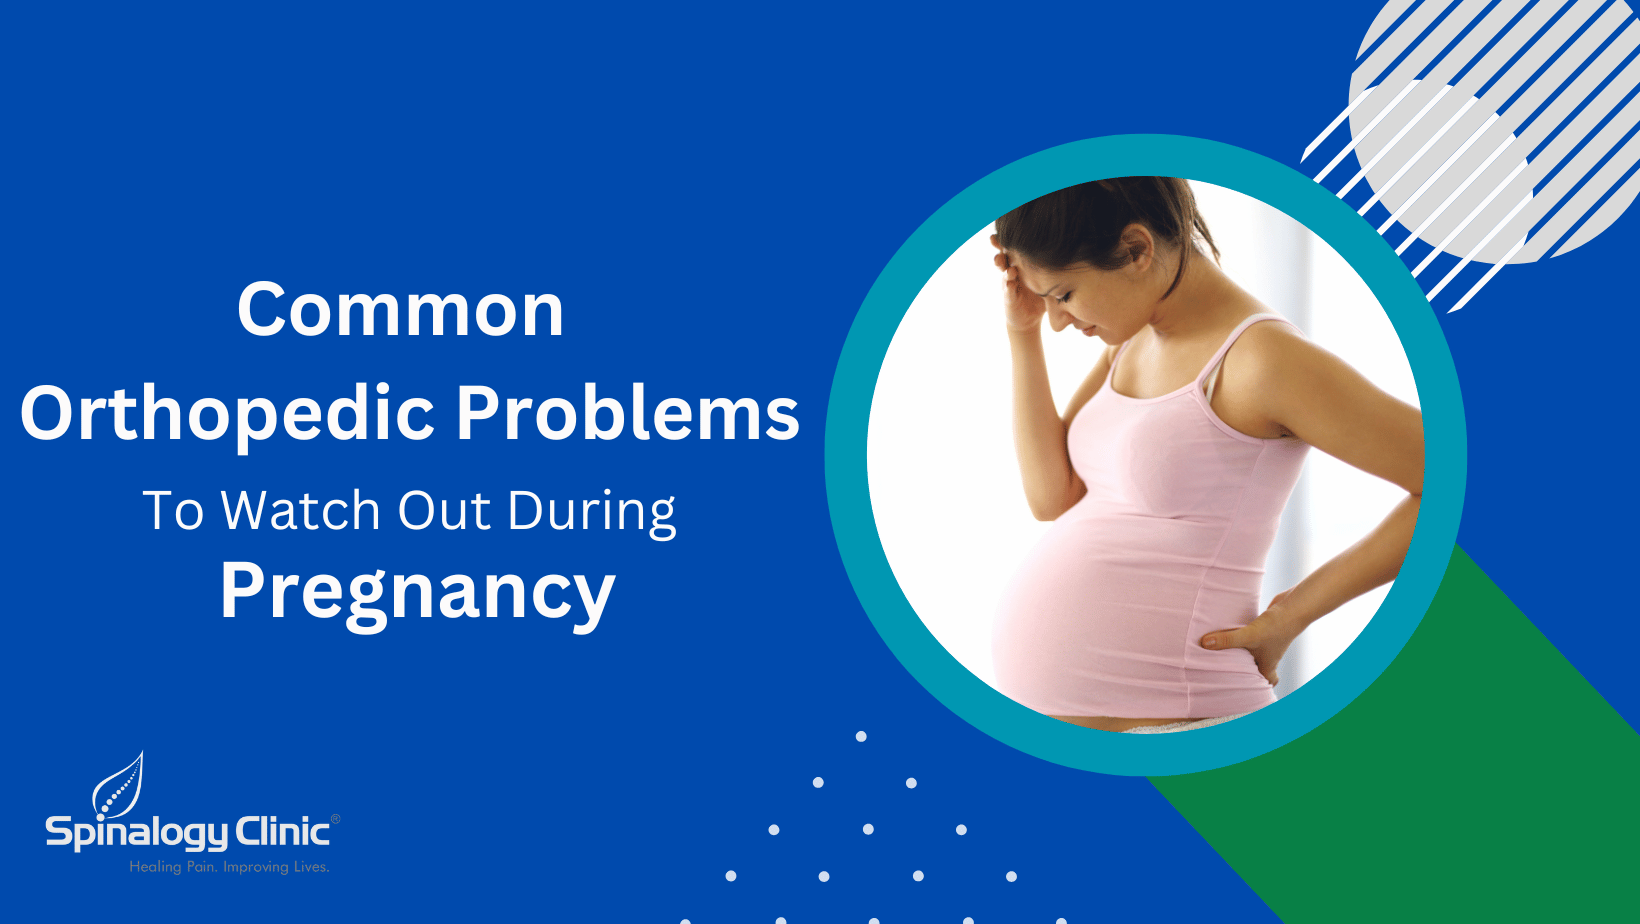 Common Orthopaedic Problems During Pregnancy